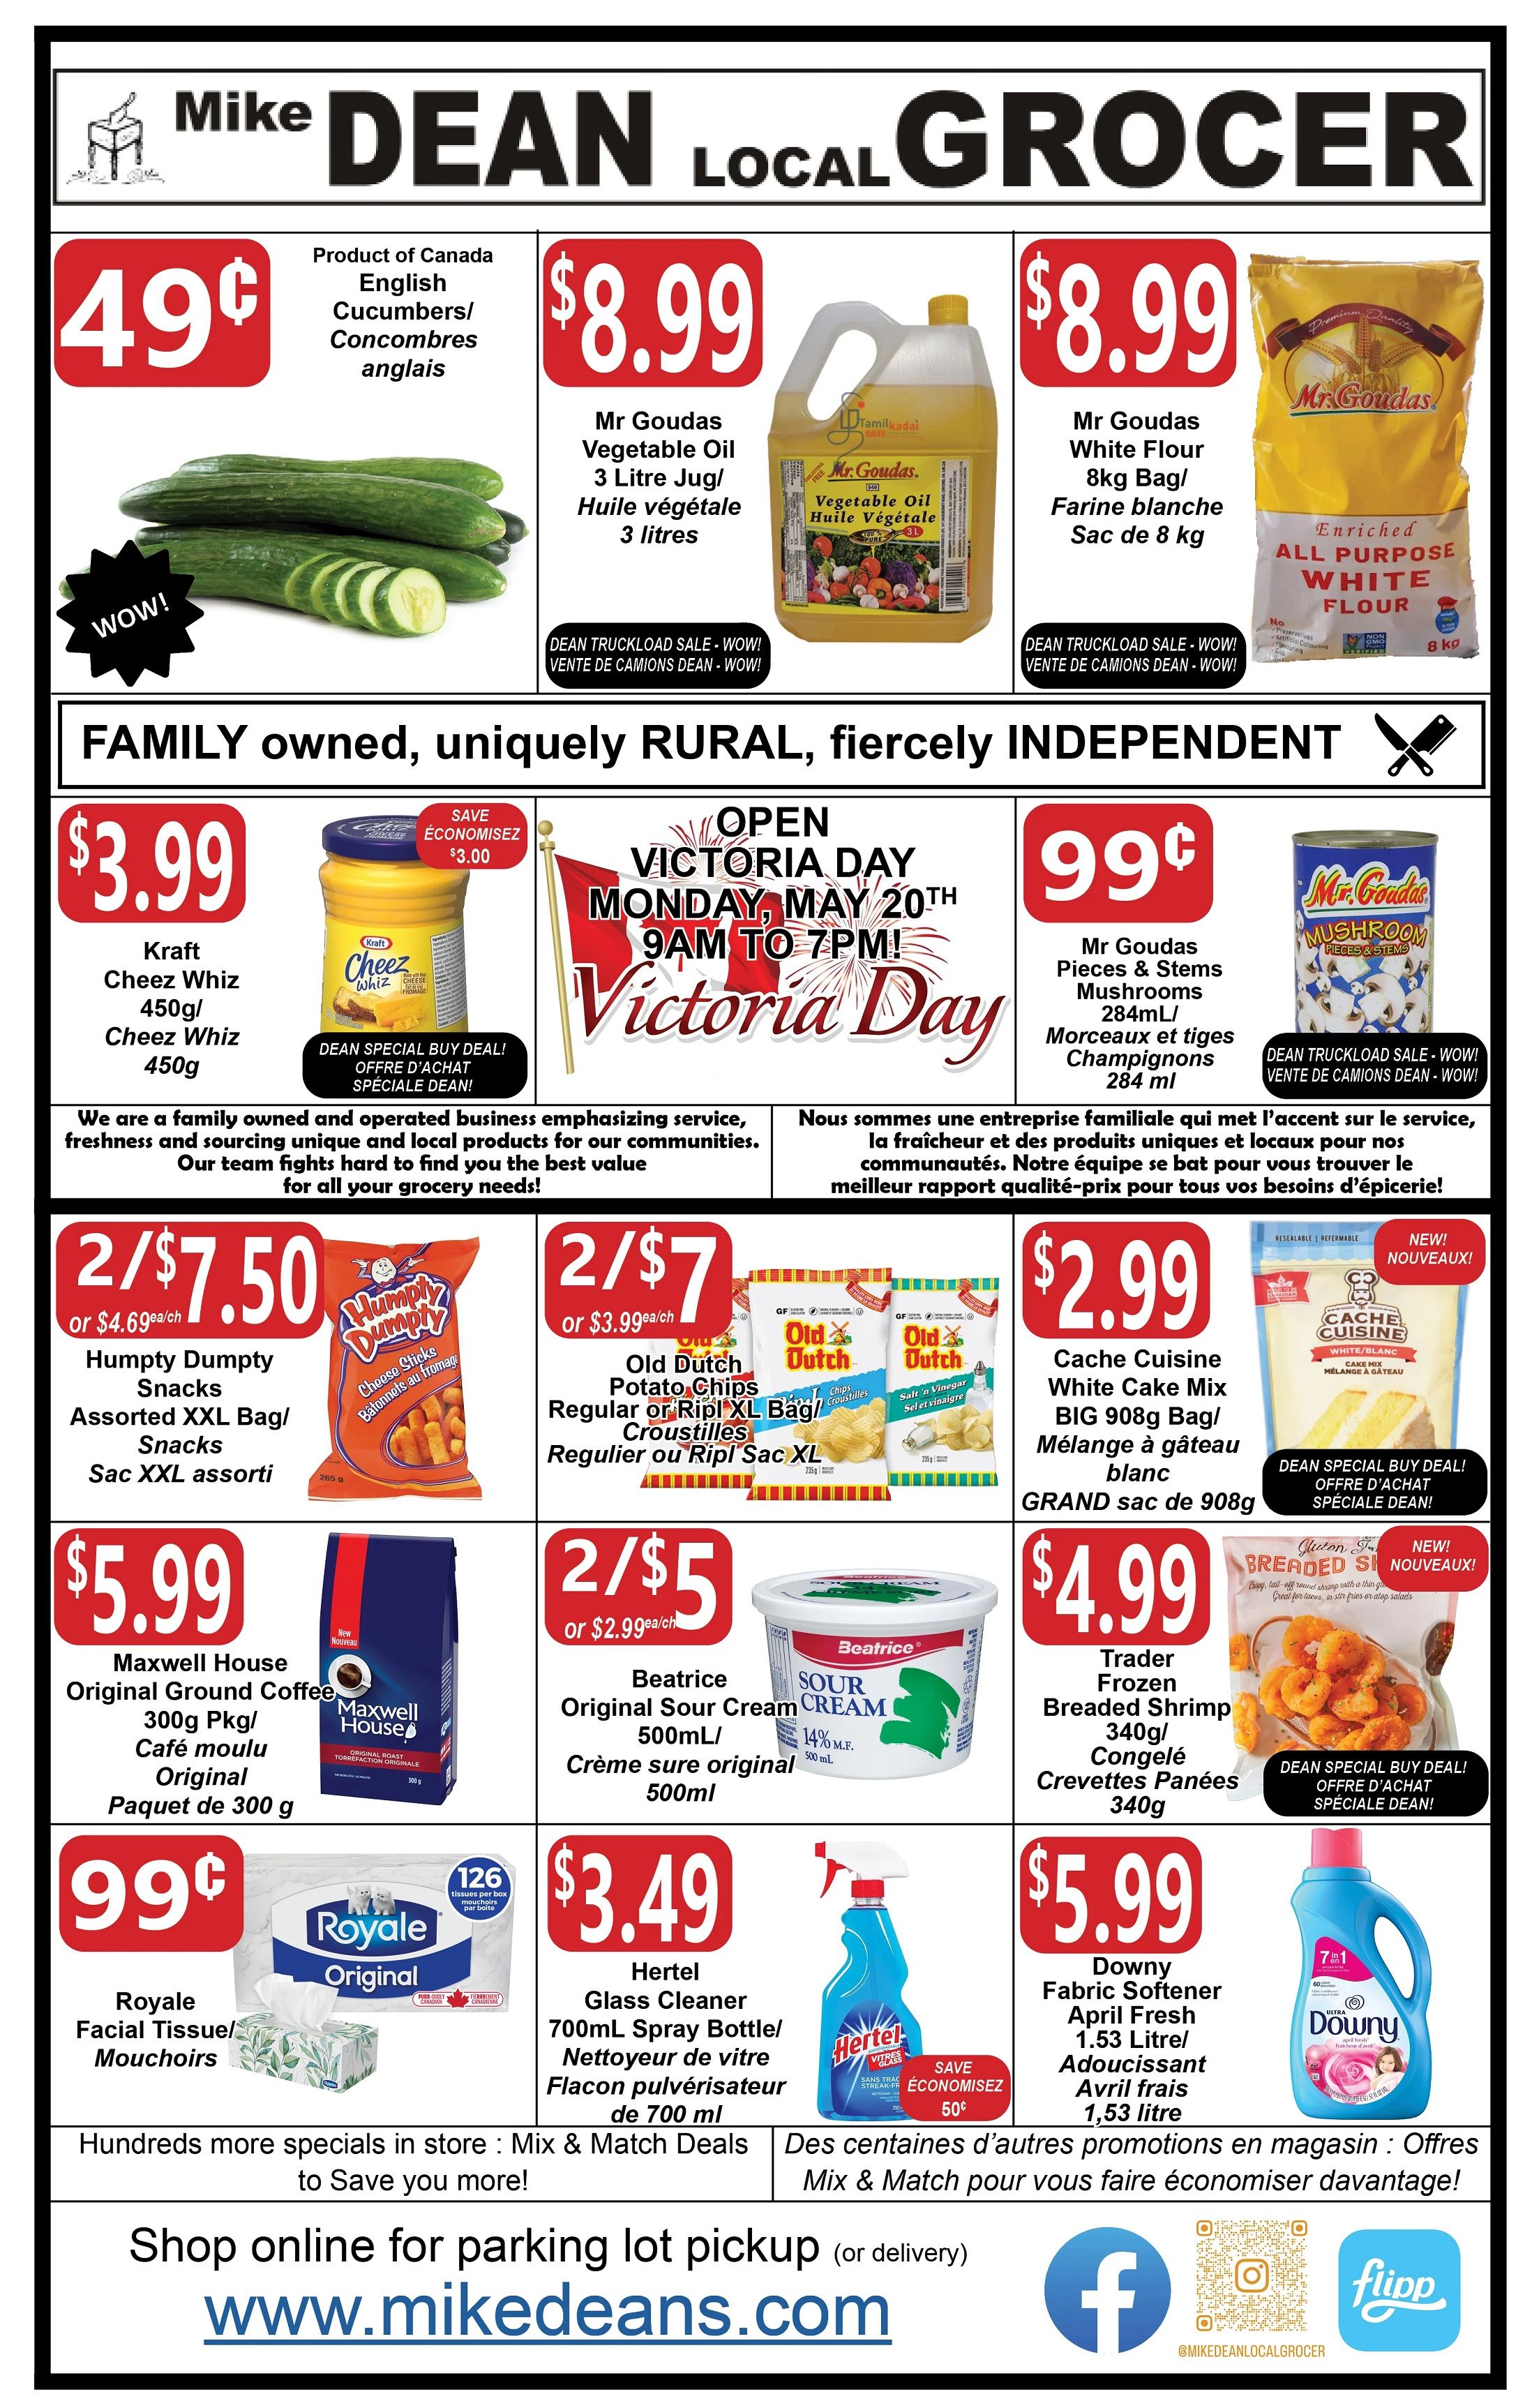 Mike Dean Local Grocer - Weekly Flyer Specials